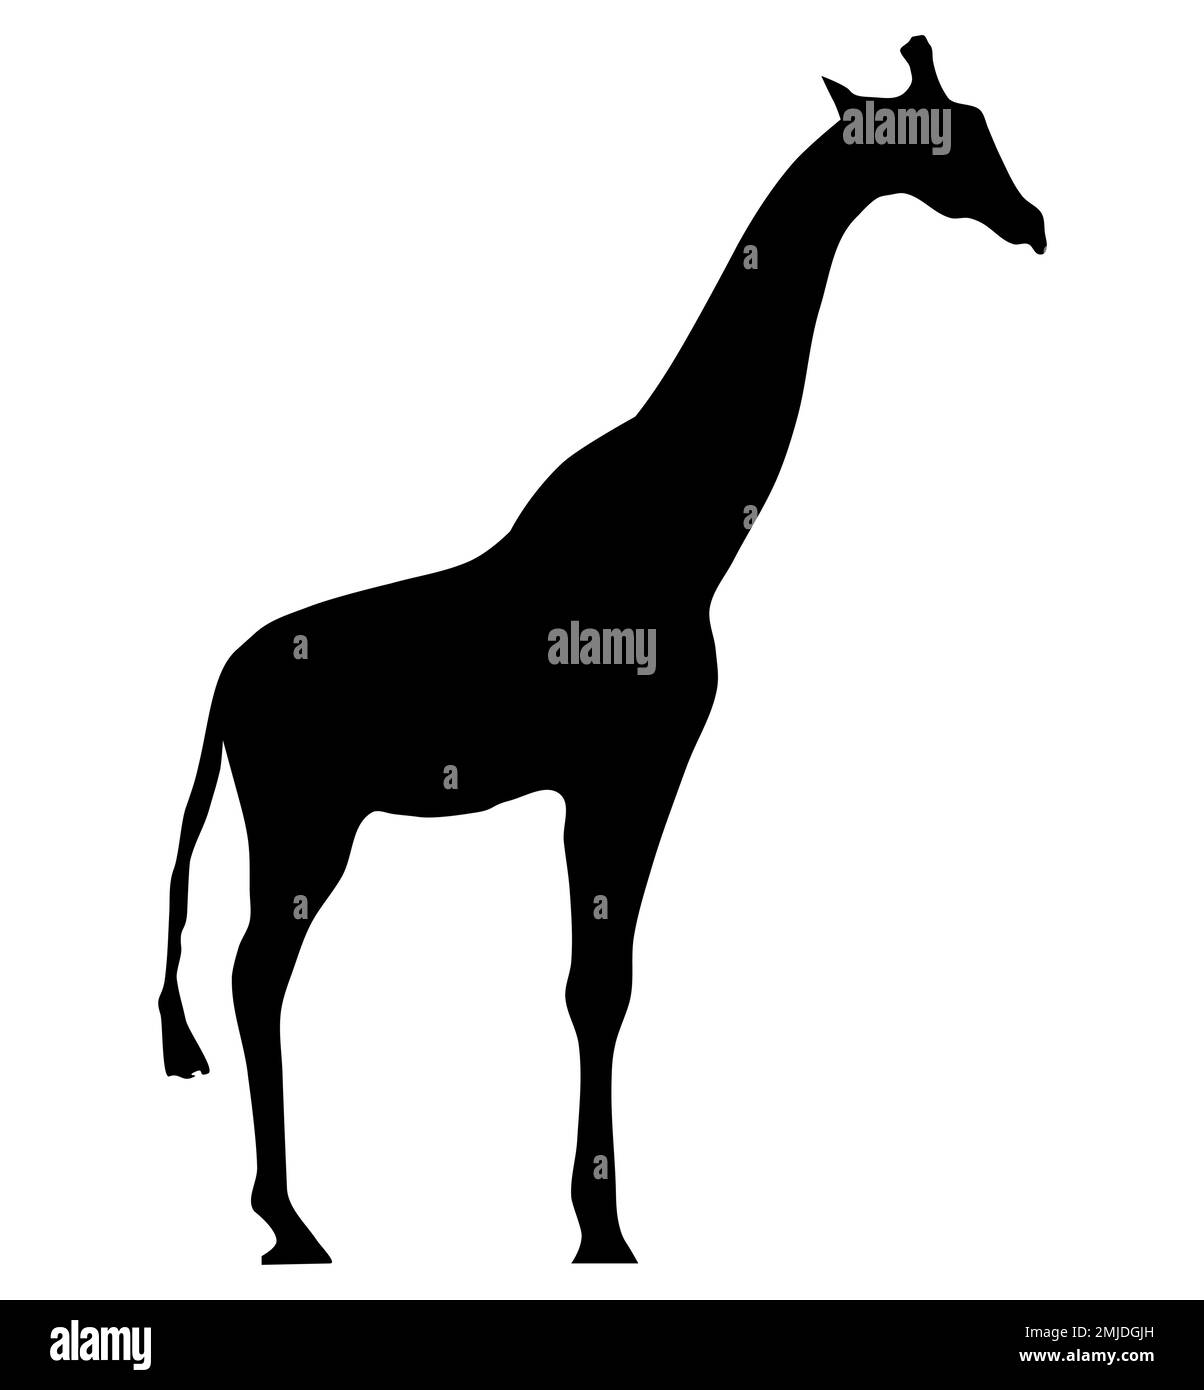 Vector illustration of a black silhouette giraffe. Isolated on white background. Icon or logo, giraffe side view profile. Stock Vector